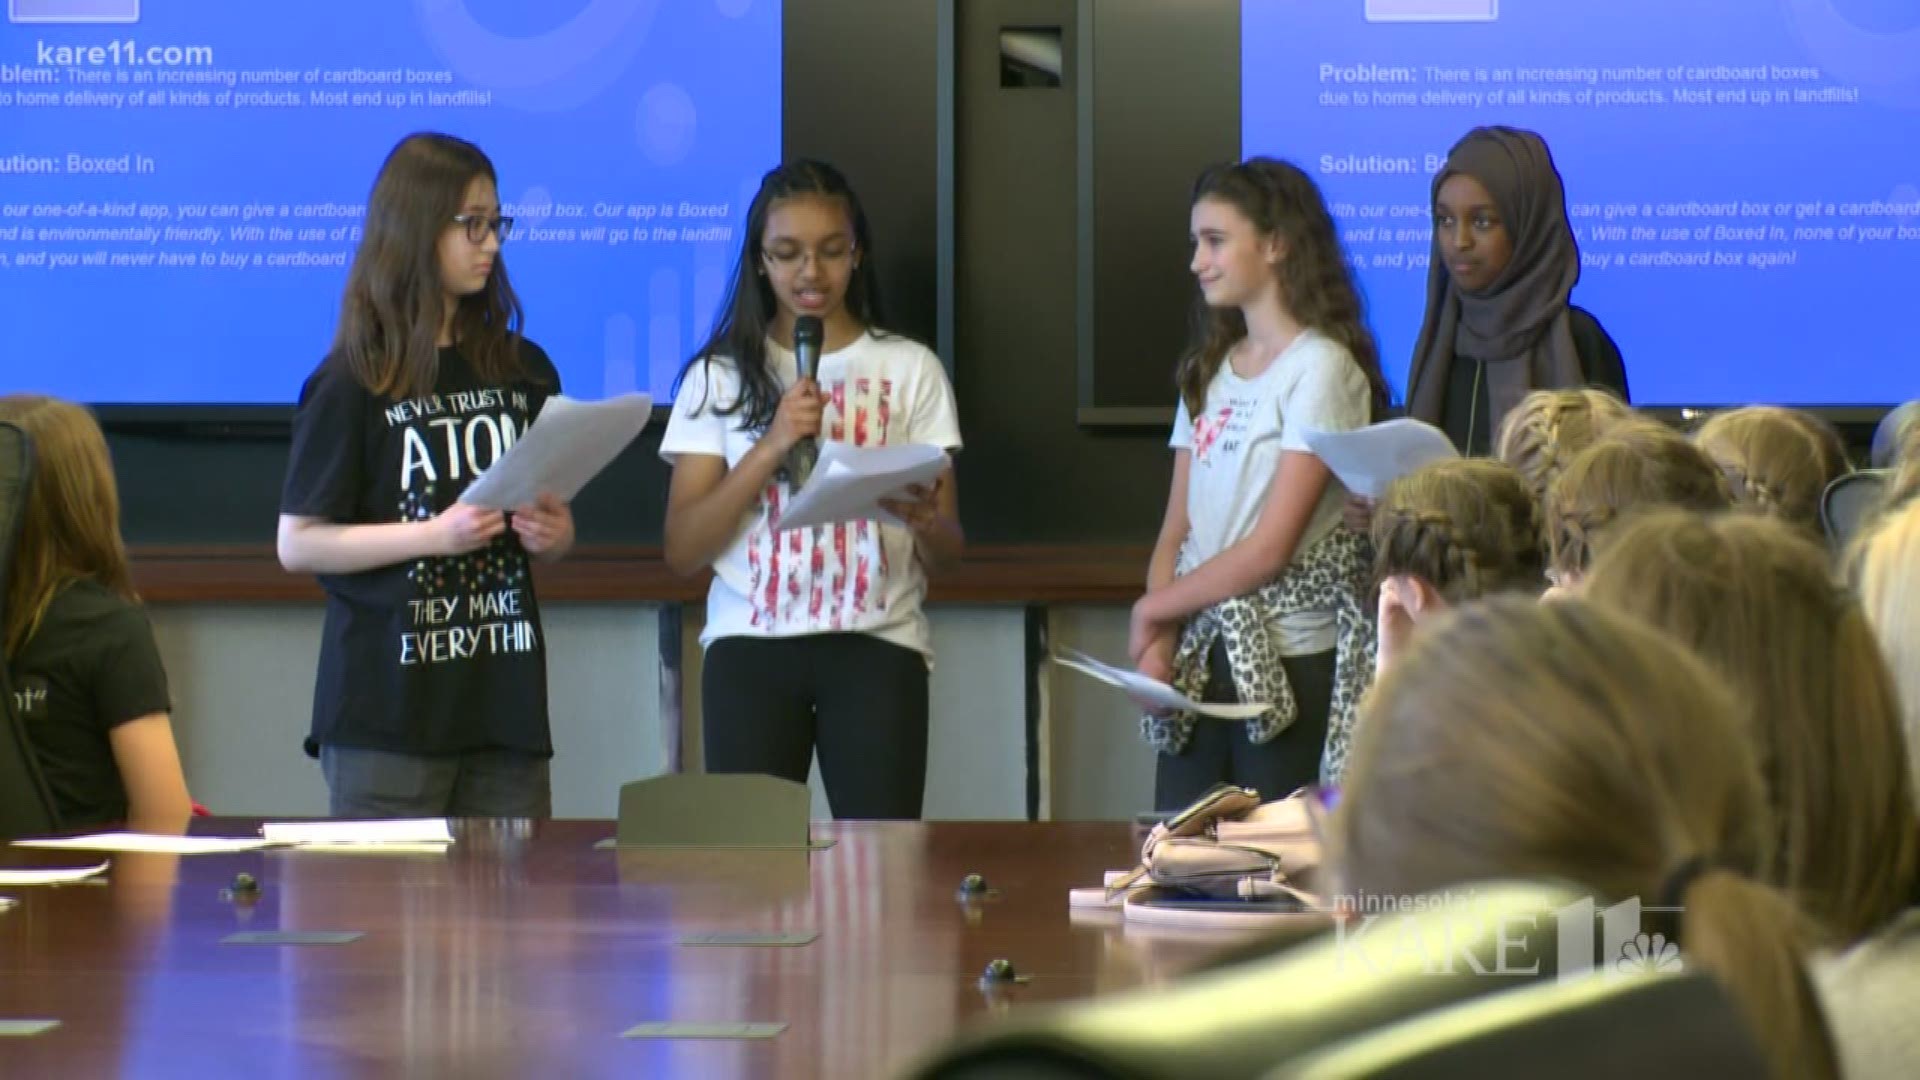 The future of technology is in the hands of the next generation and that was on full display inside the U.S. Bank boardroom. https://kare11.tv/2rf55rZ